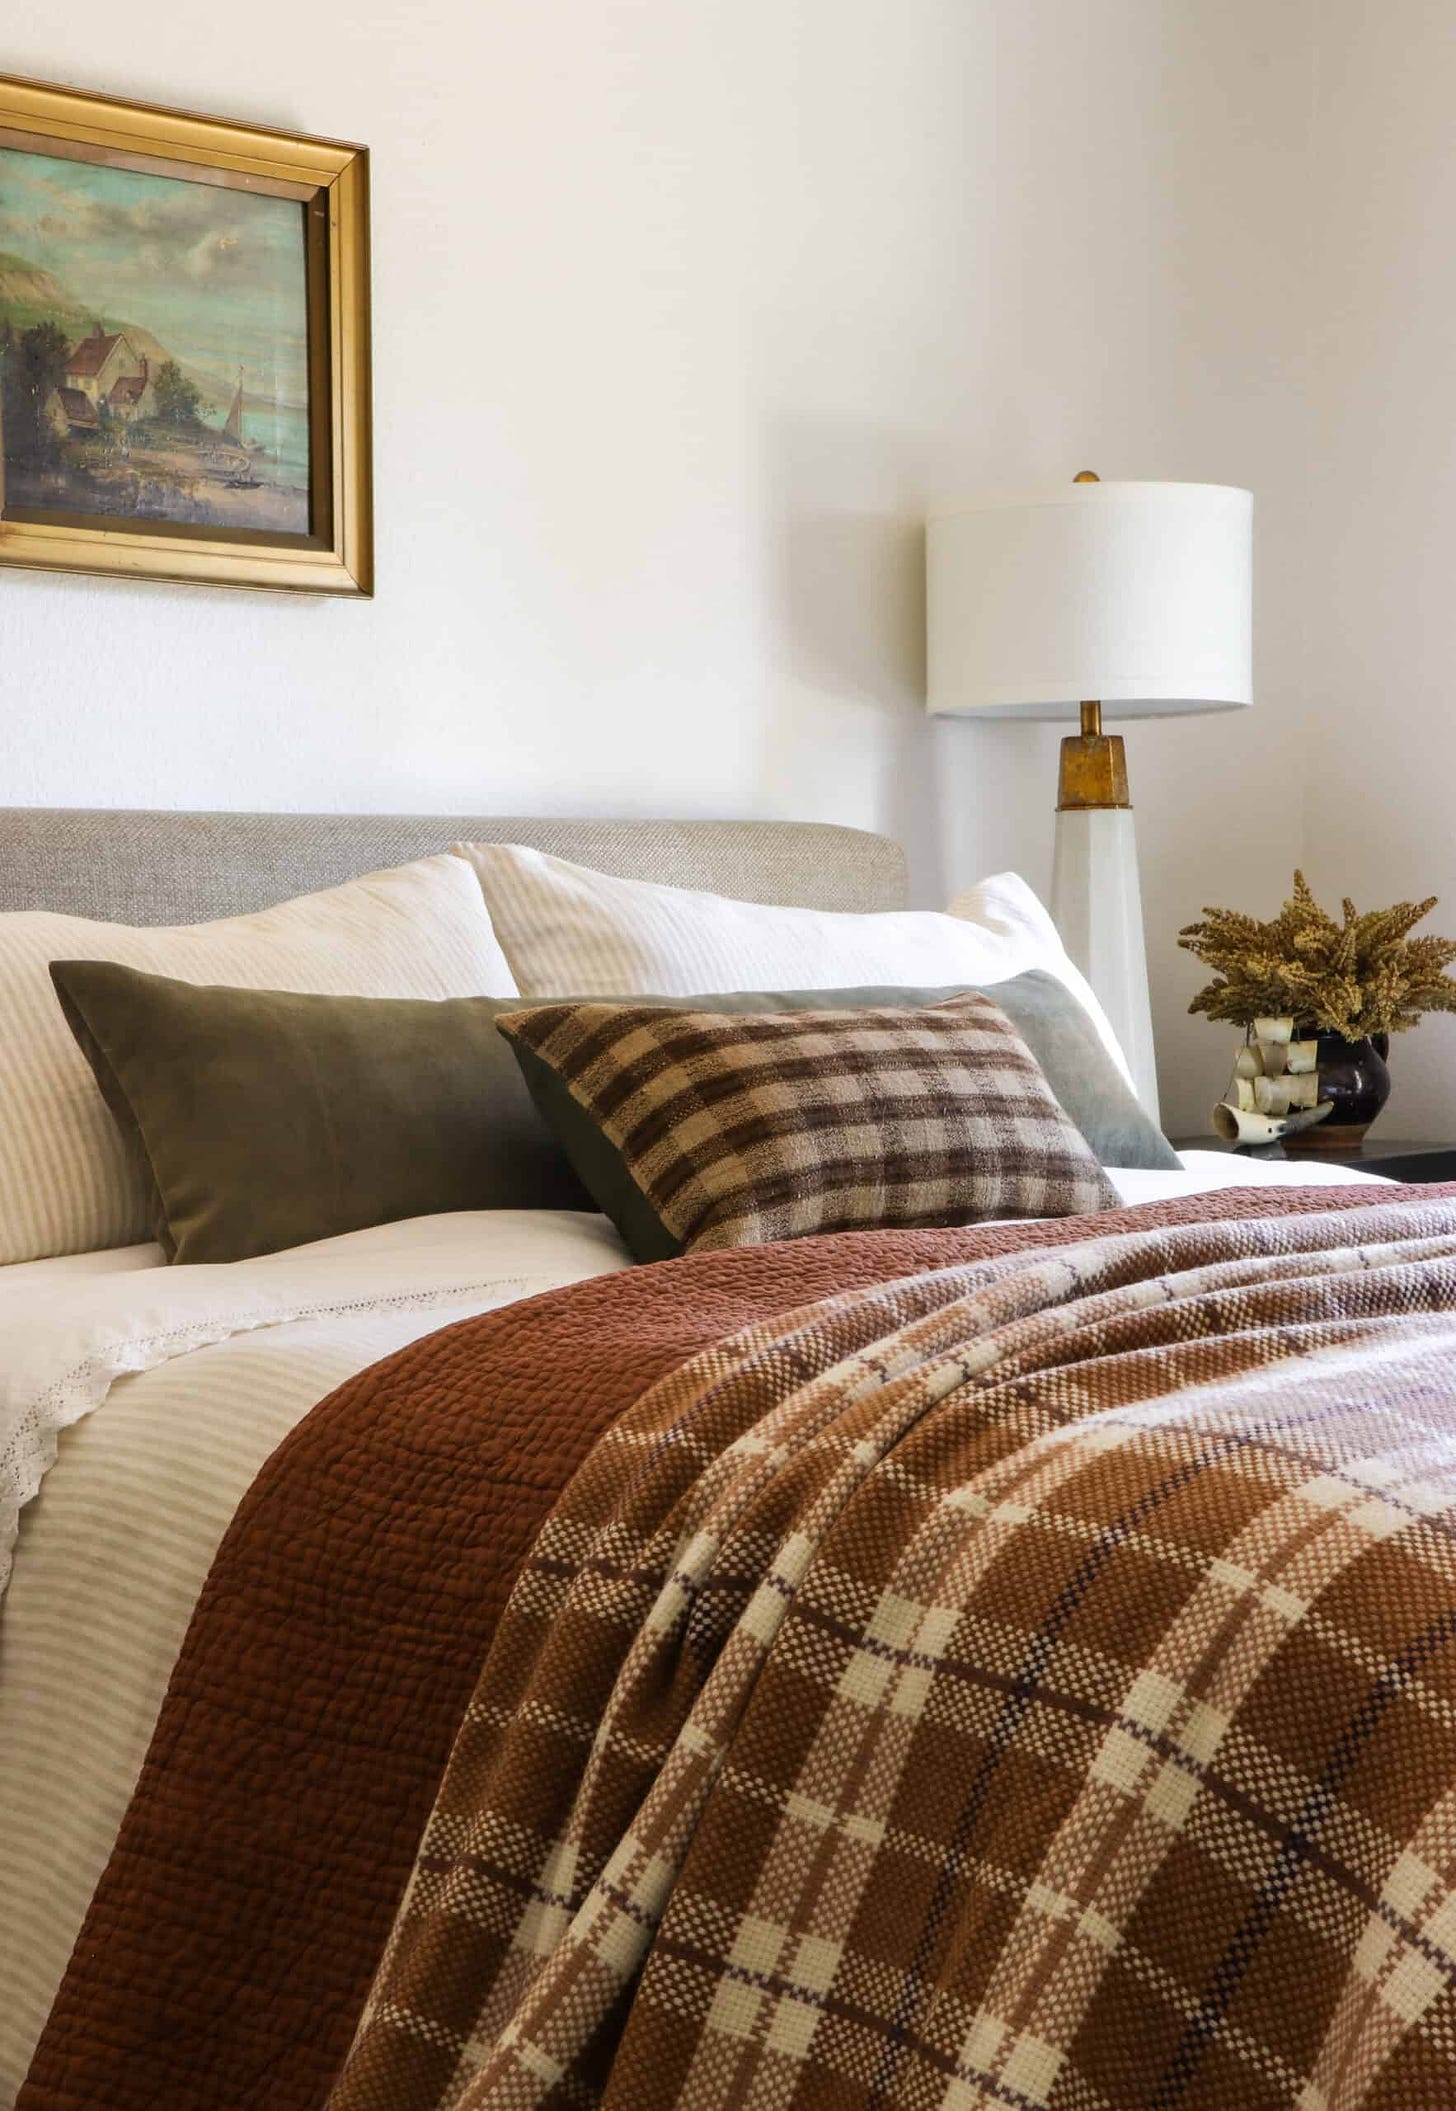 plaid and rust bedding on bed with oil painting above